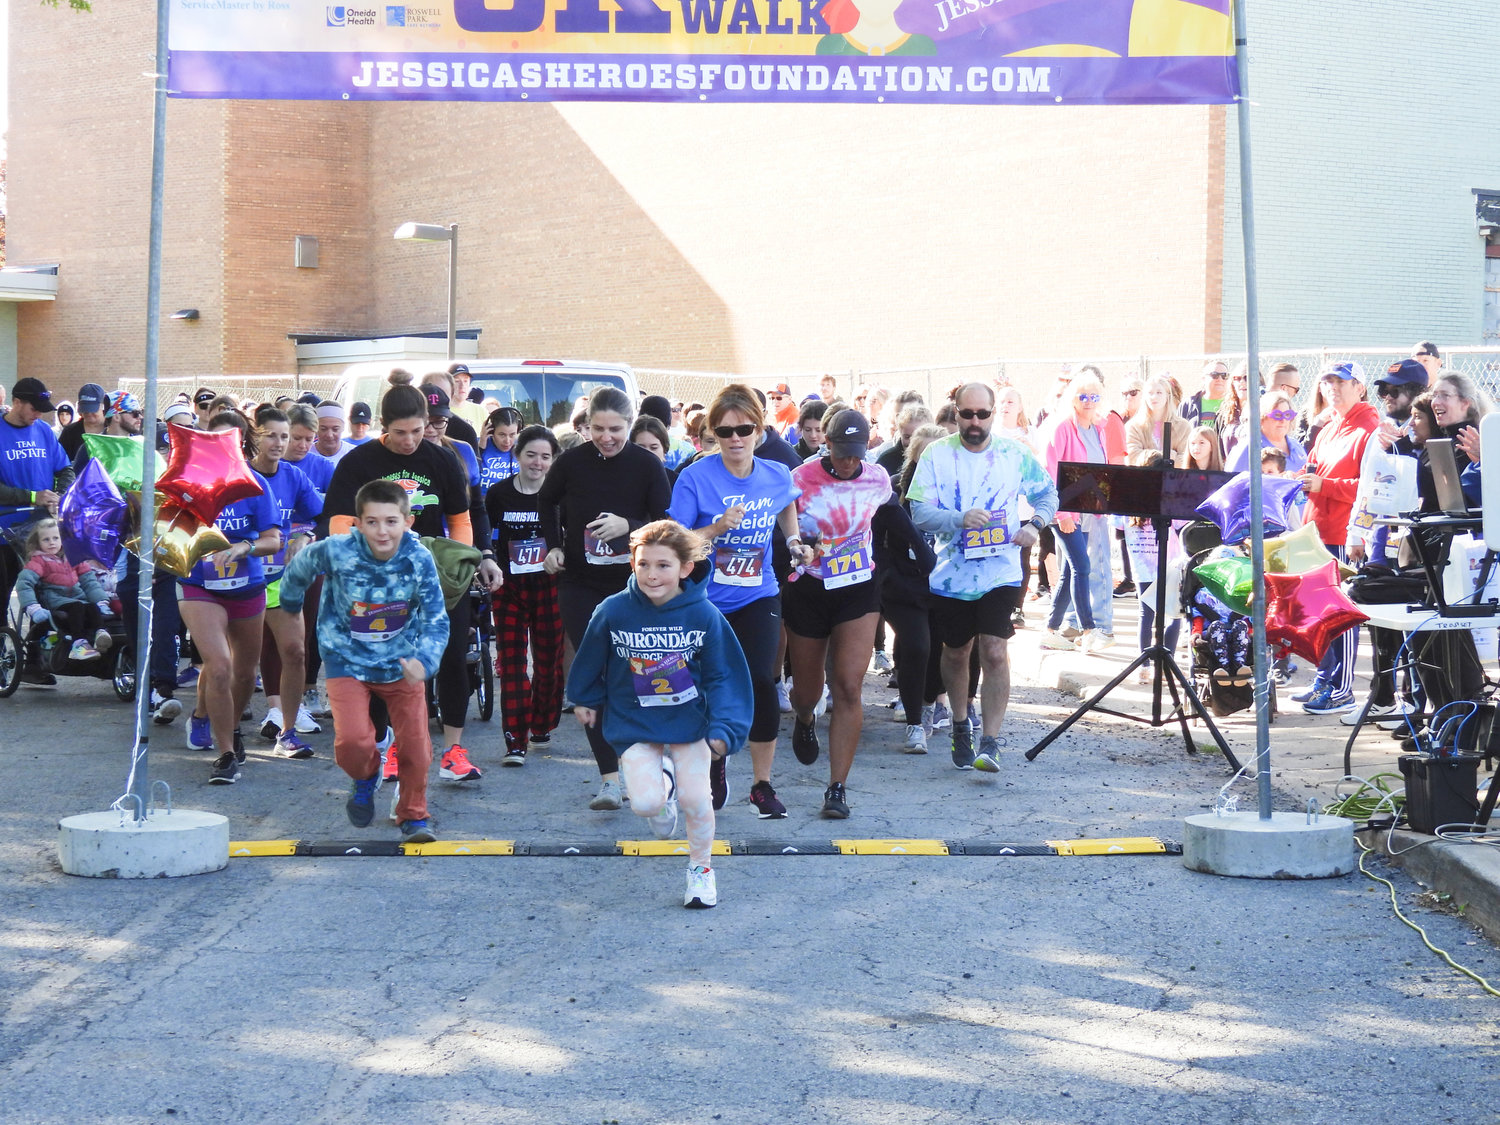 Men, women, and children take off for the Jessica's Heroes 5K Run on Saturday, Sept. 24 at Oneida High School.